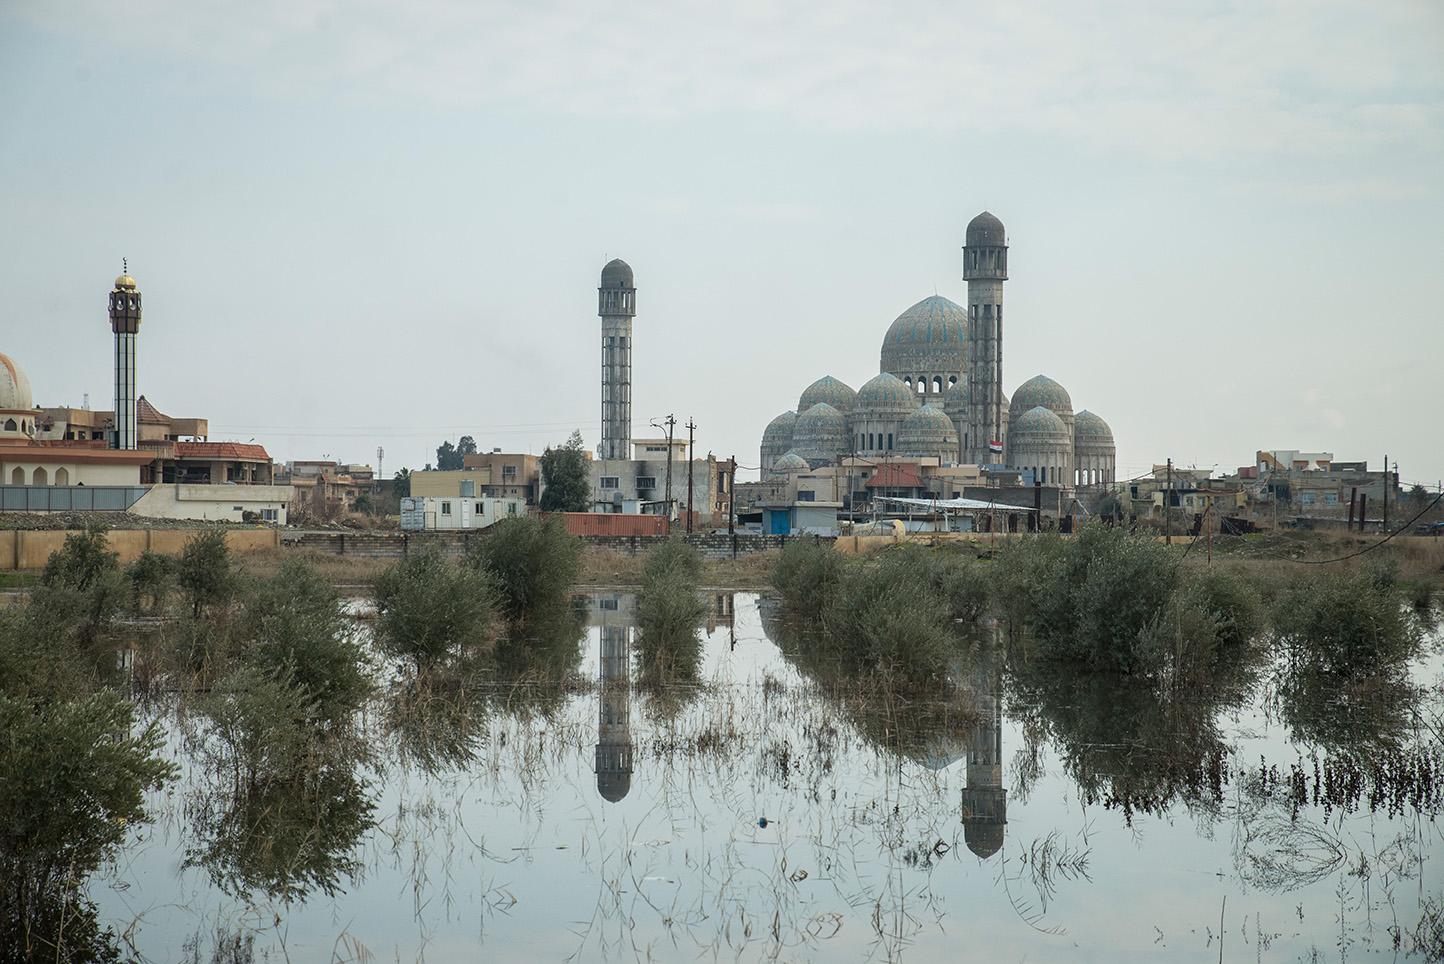 Mosul, Iraq. The Great Mosque of Mosul, a Sunni mosque originally built by Saddam Hussein, though...